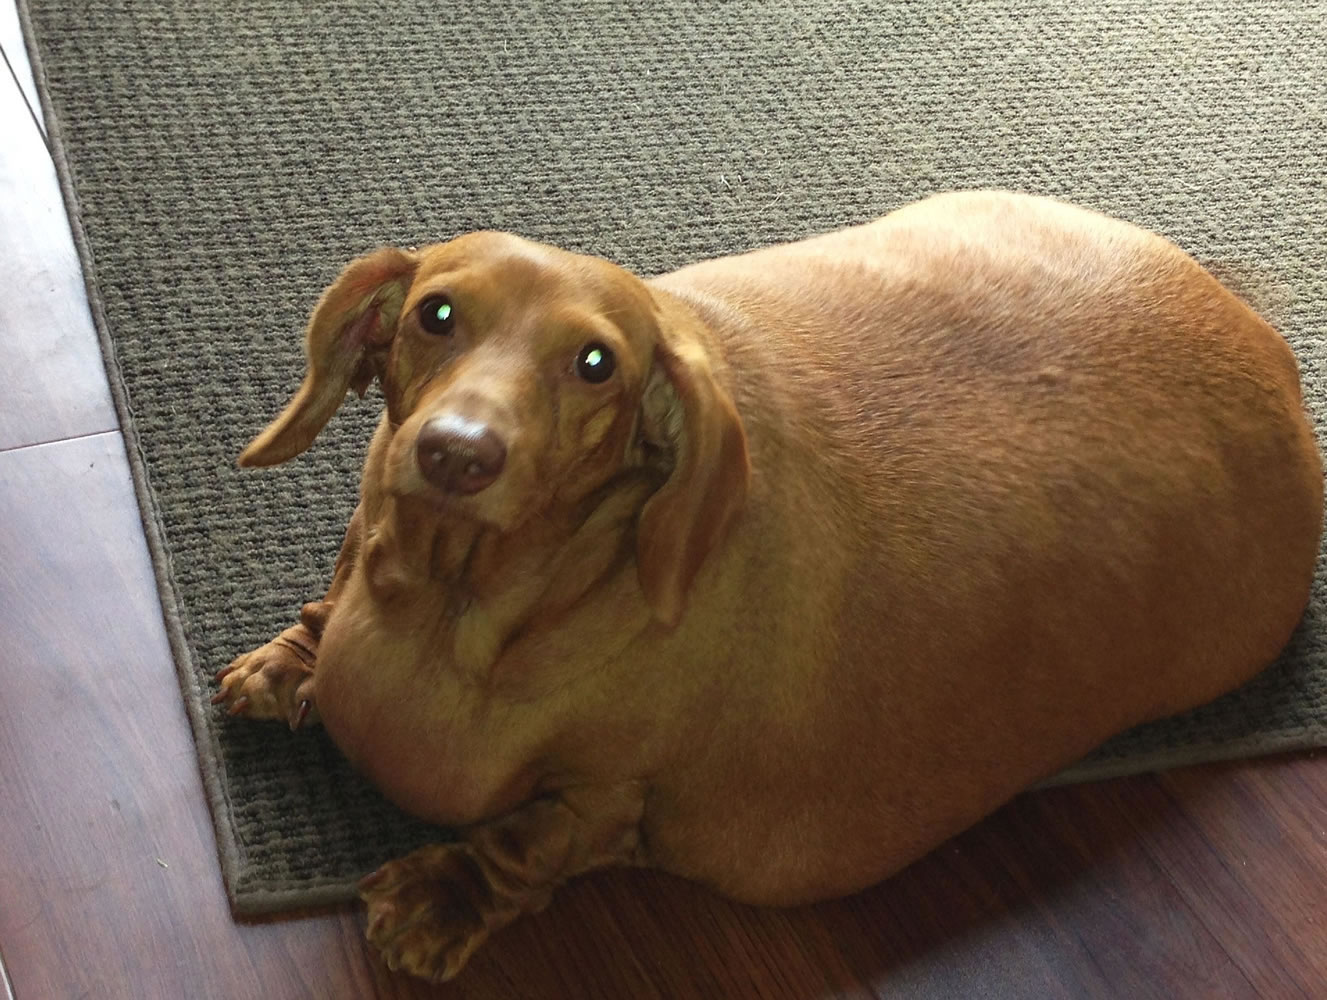 Dennis, a dachshund, rests on the ground in Columbus, Ohio.